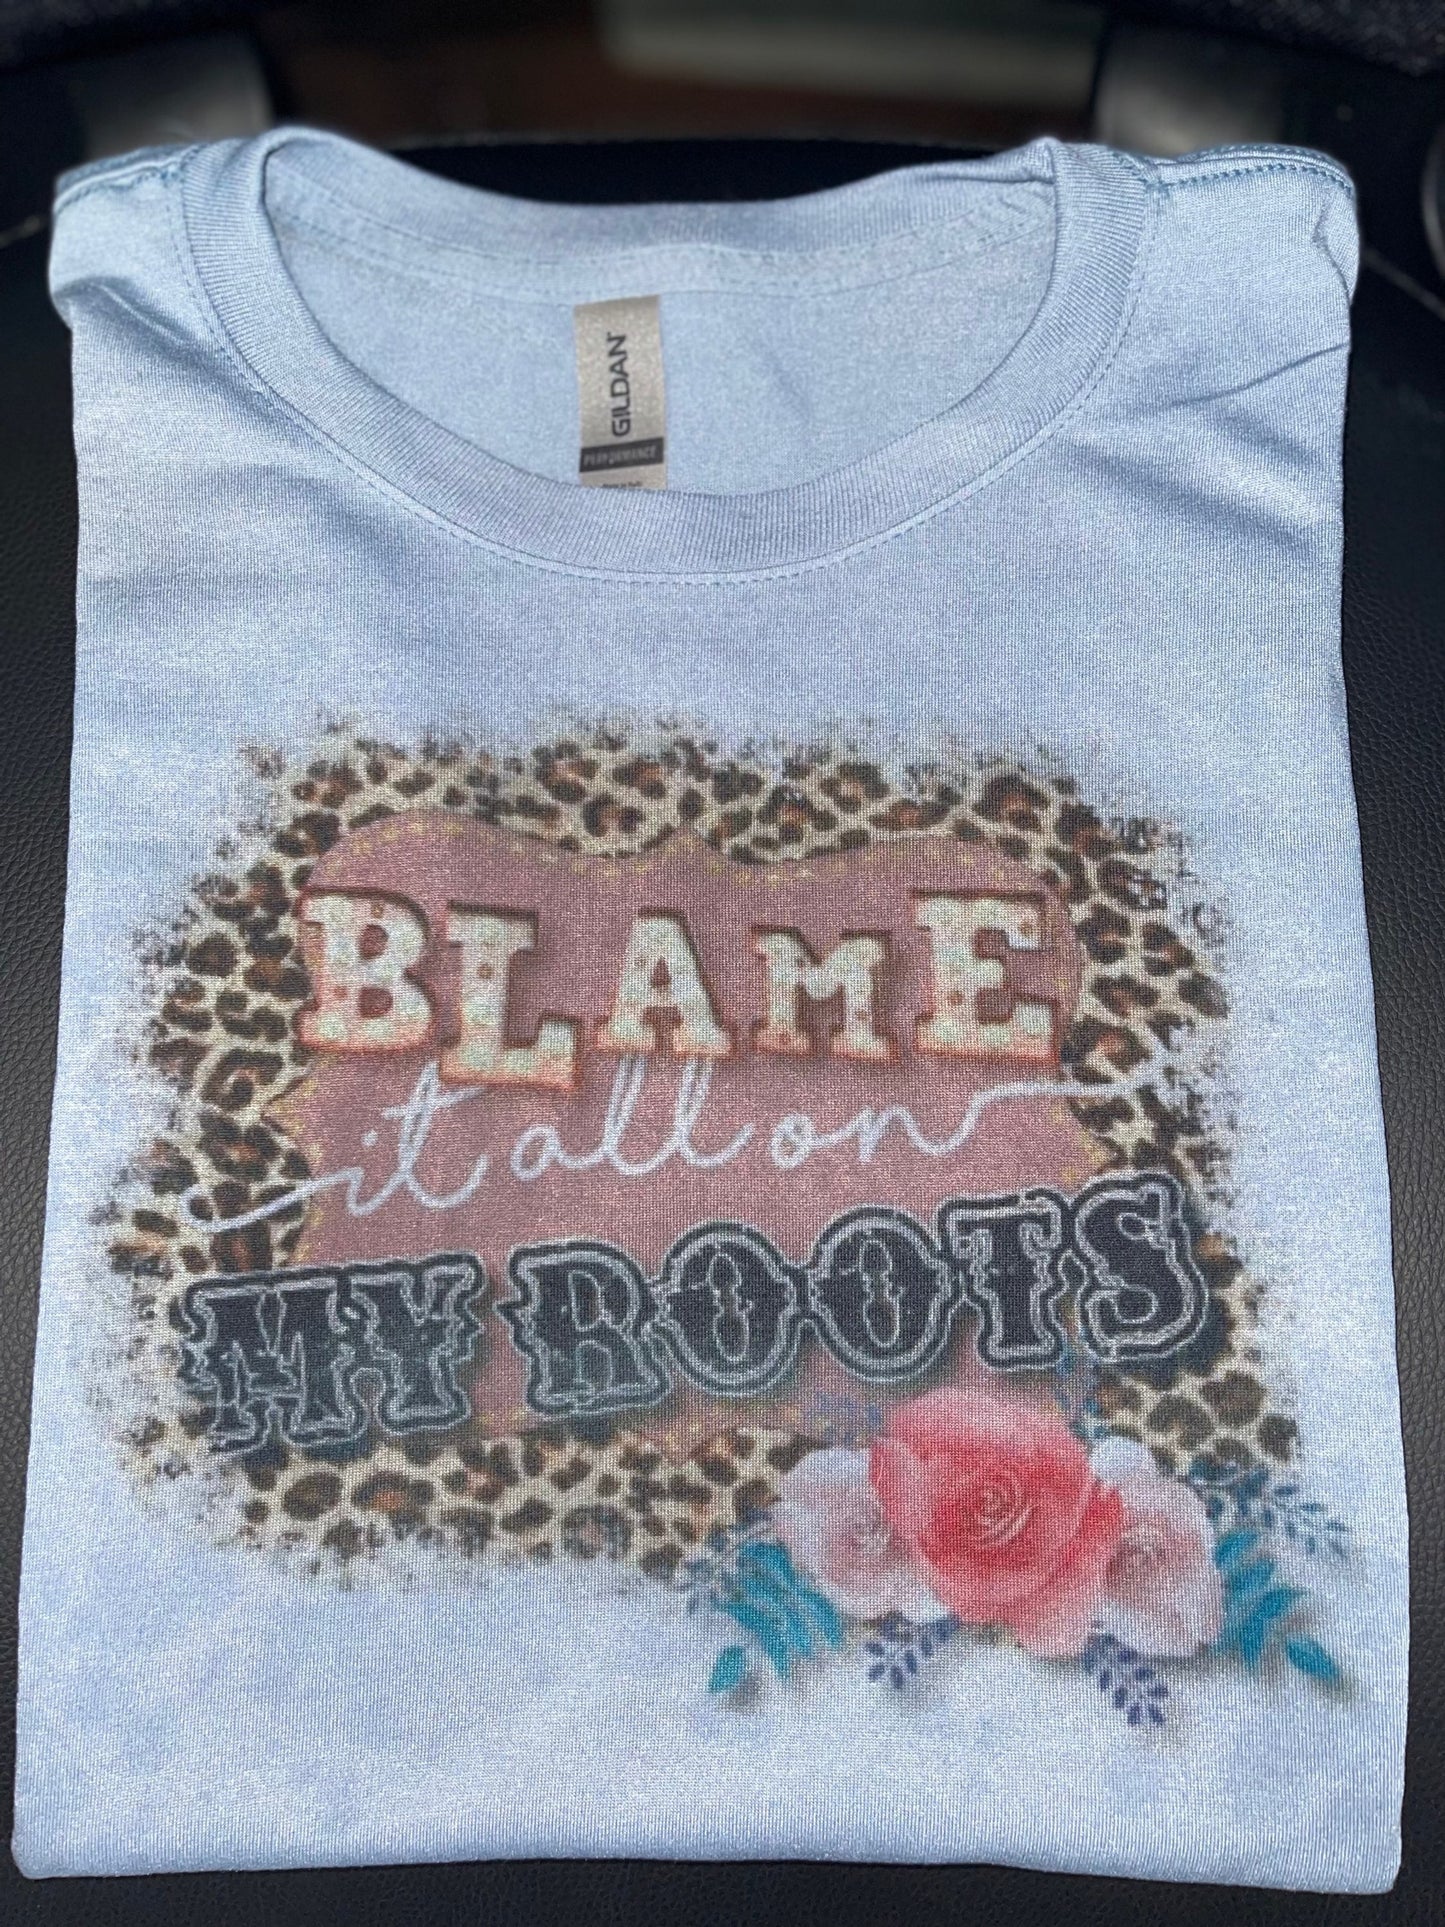 Blame it all on my roots - Tshirt